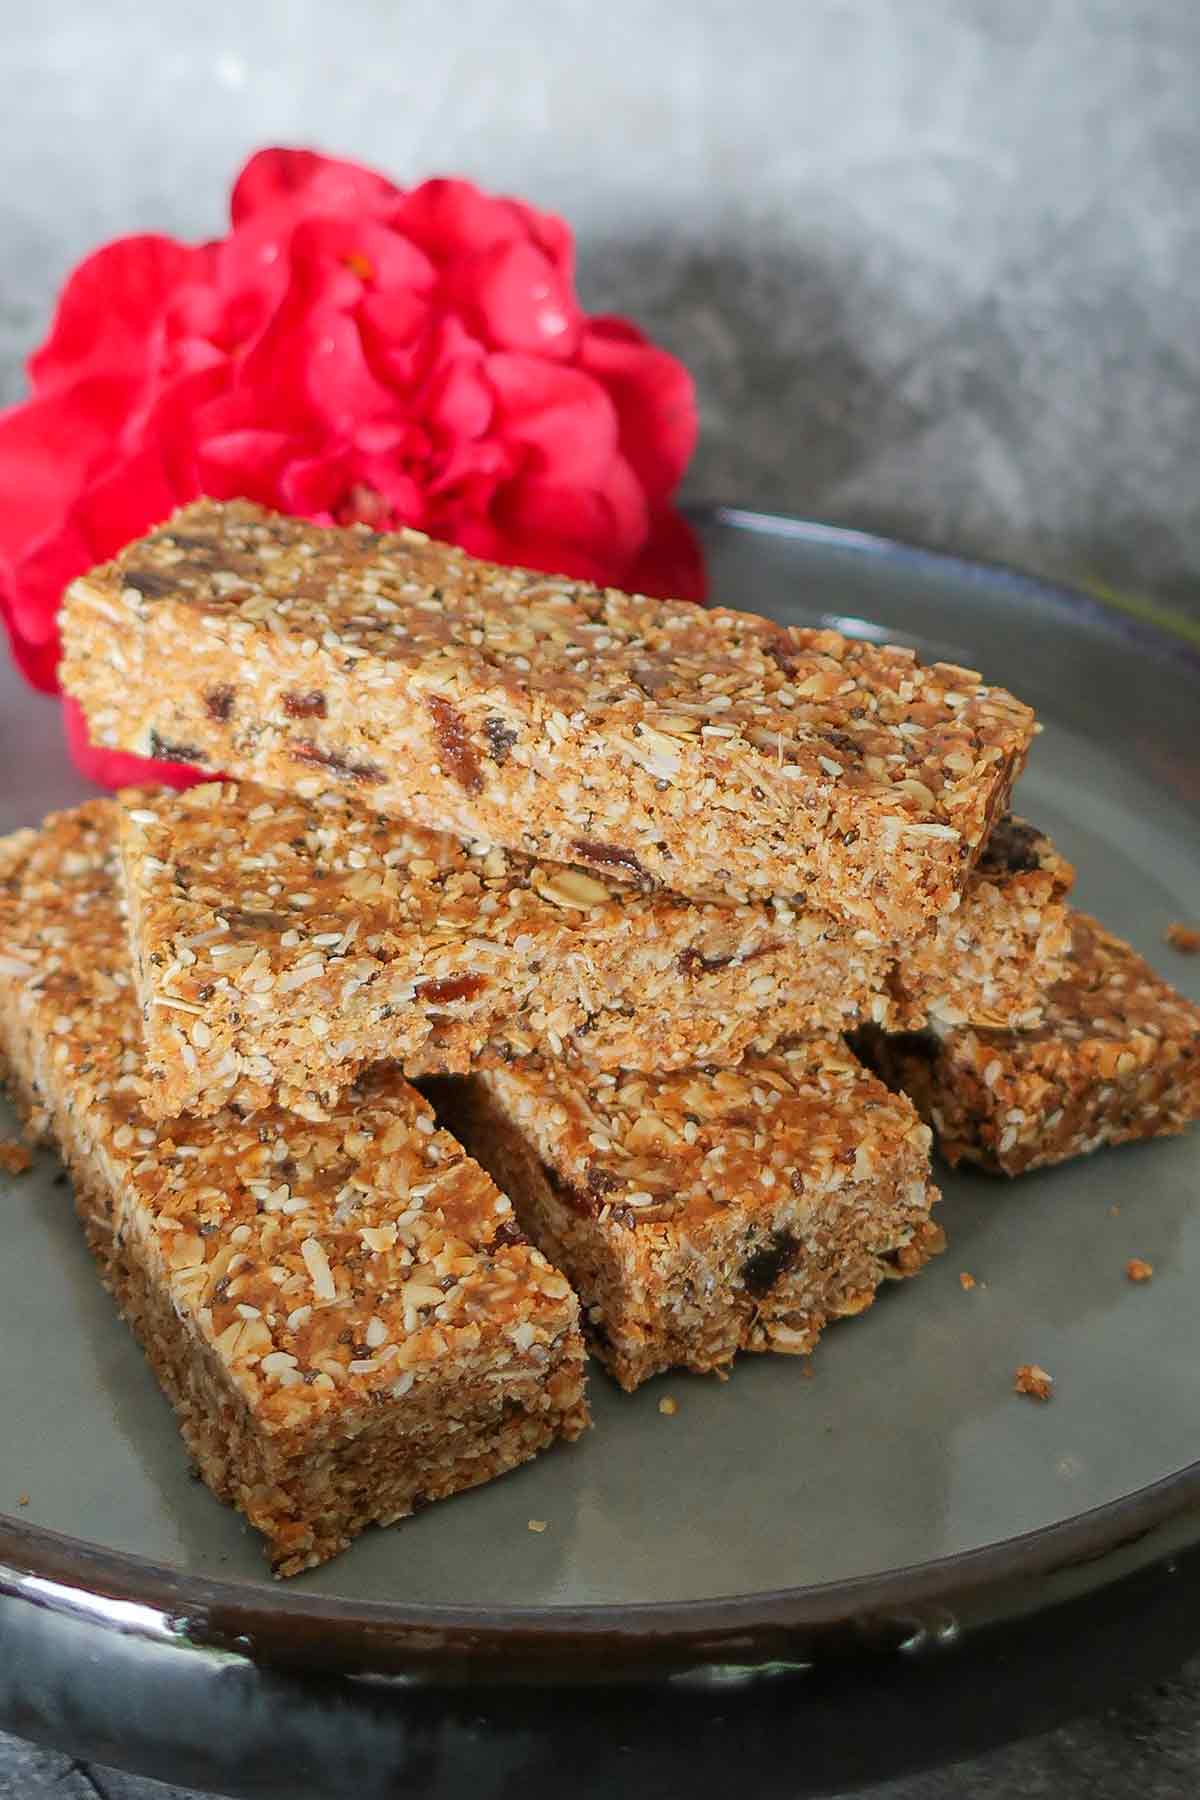 5 oat, fruit and nut bars stacked on a plate